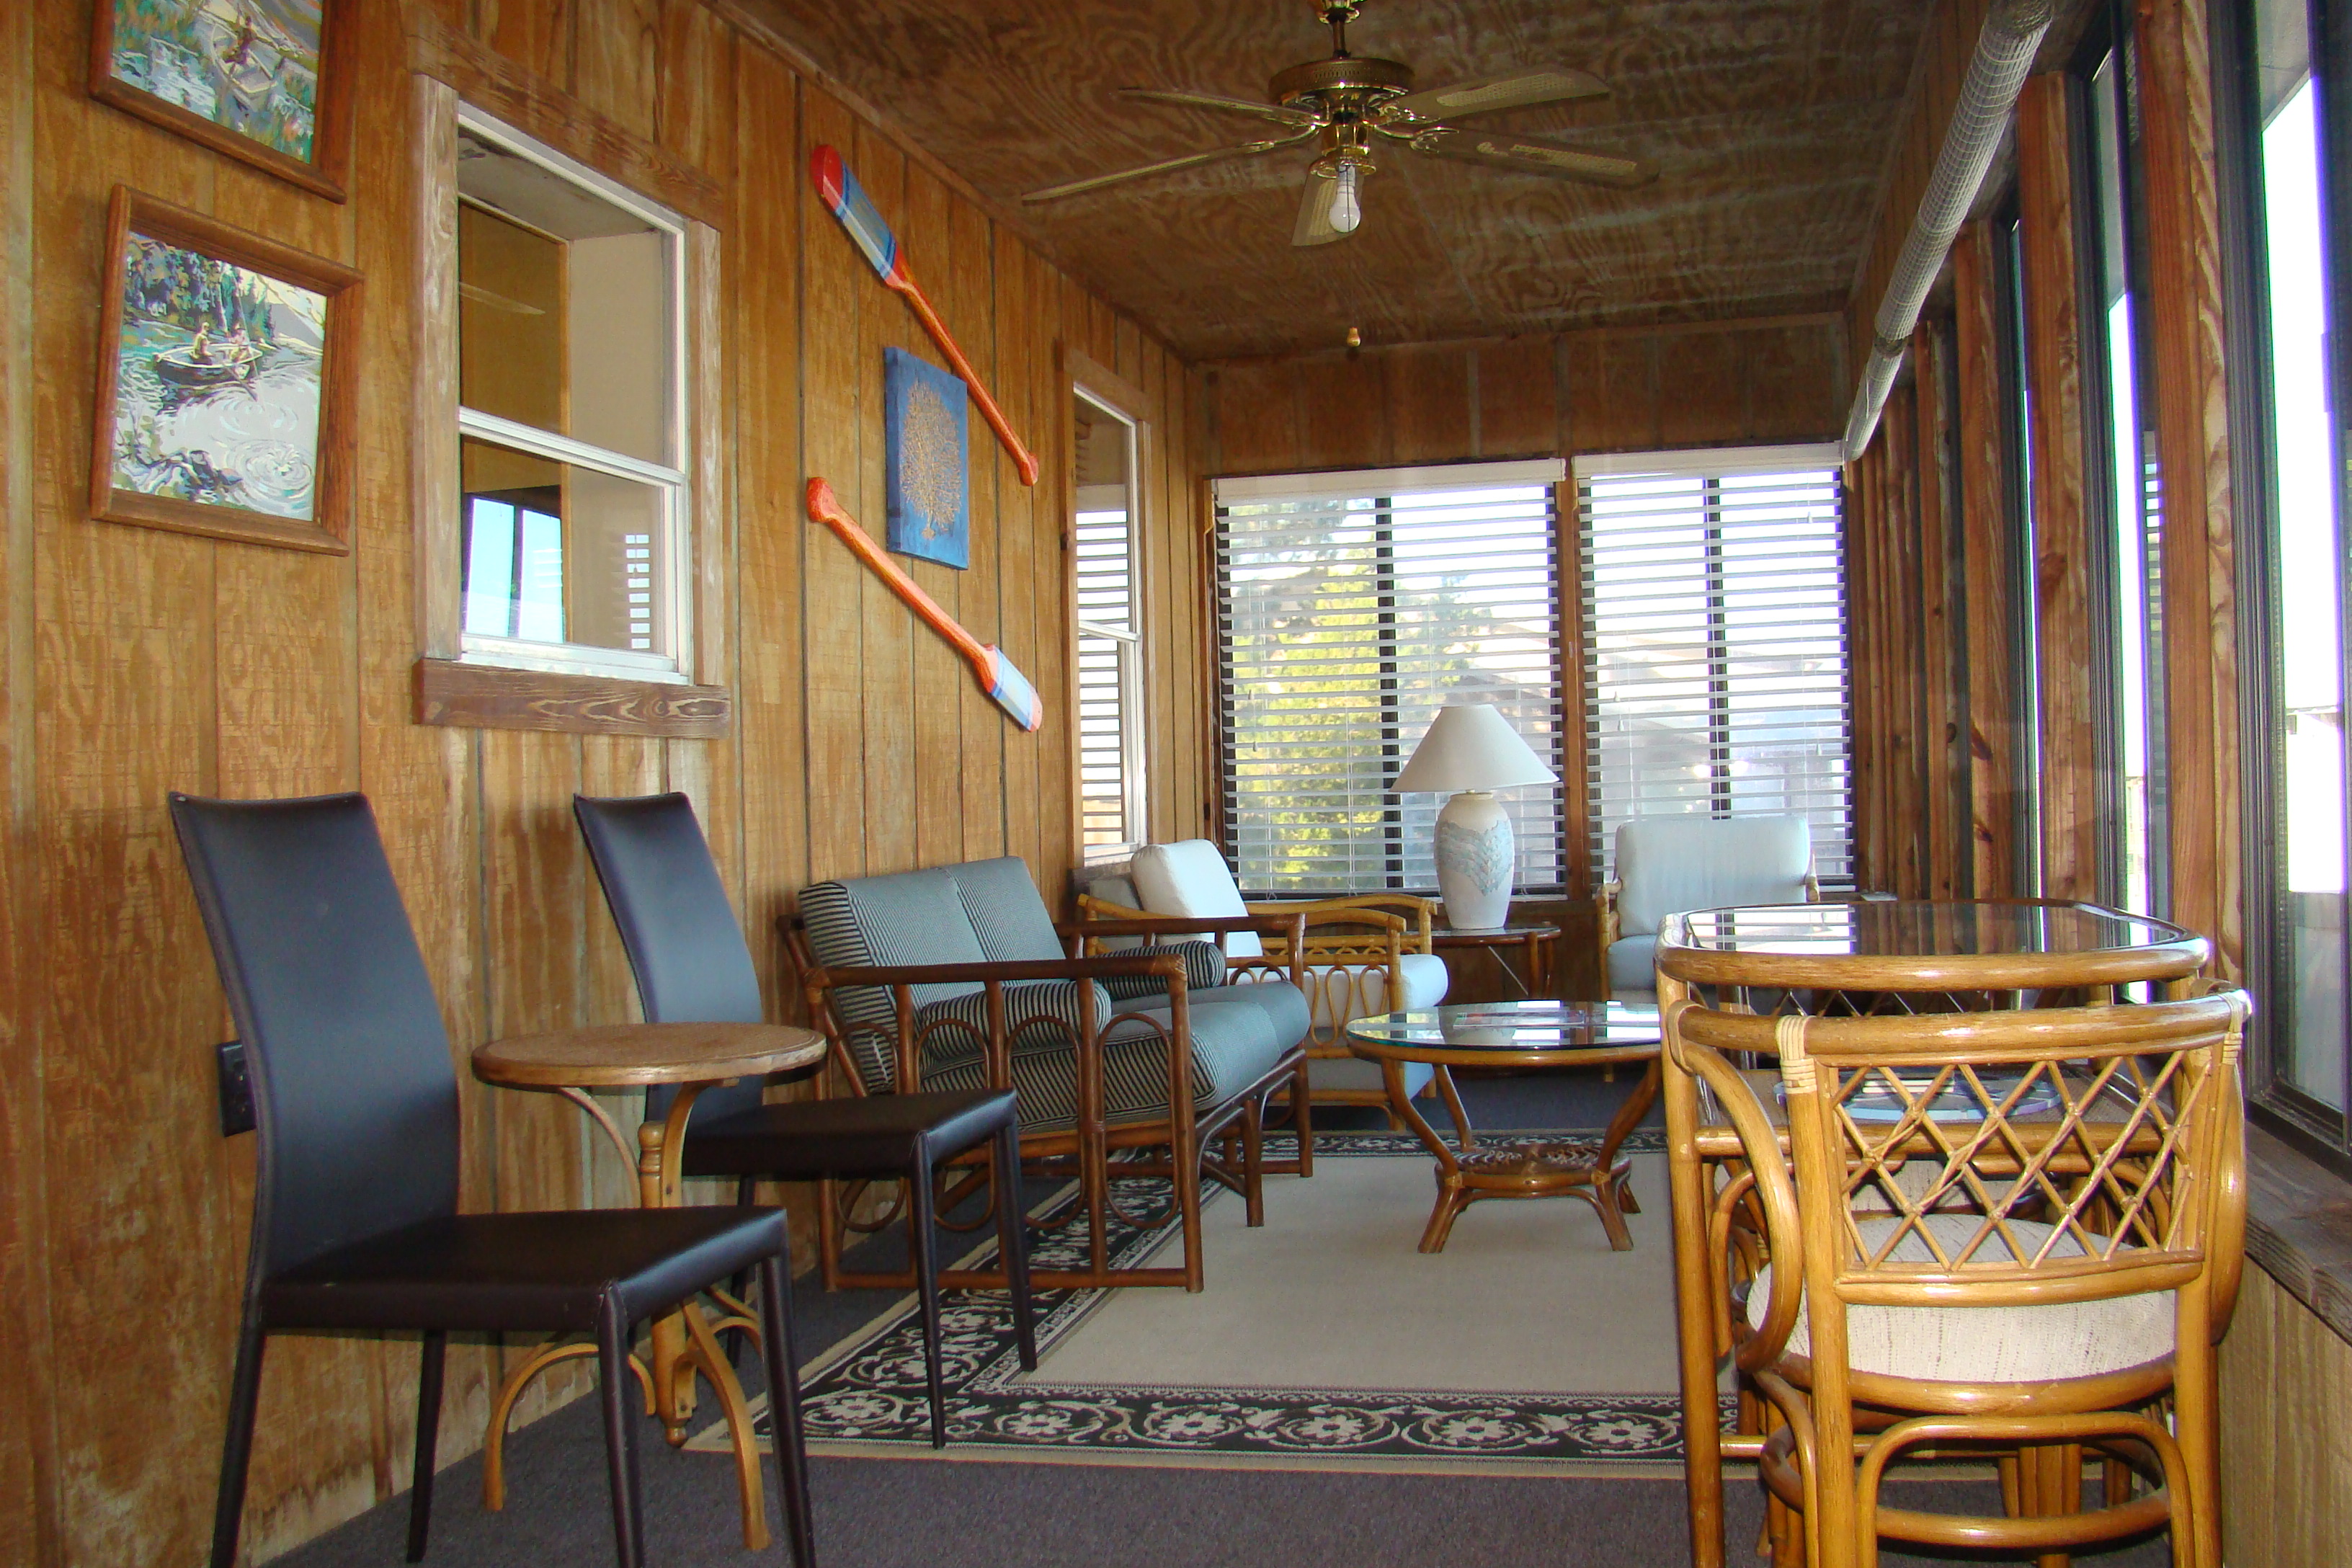 Enclosed Porch Waterfront View - Florida Vacation Rentals - Horseshoe Beach Real Estate - Tammy Bryan